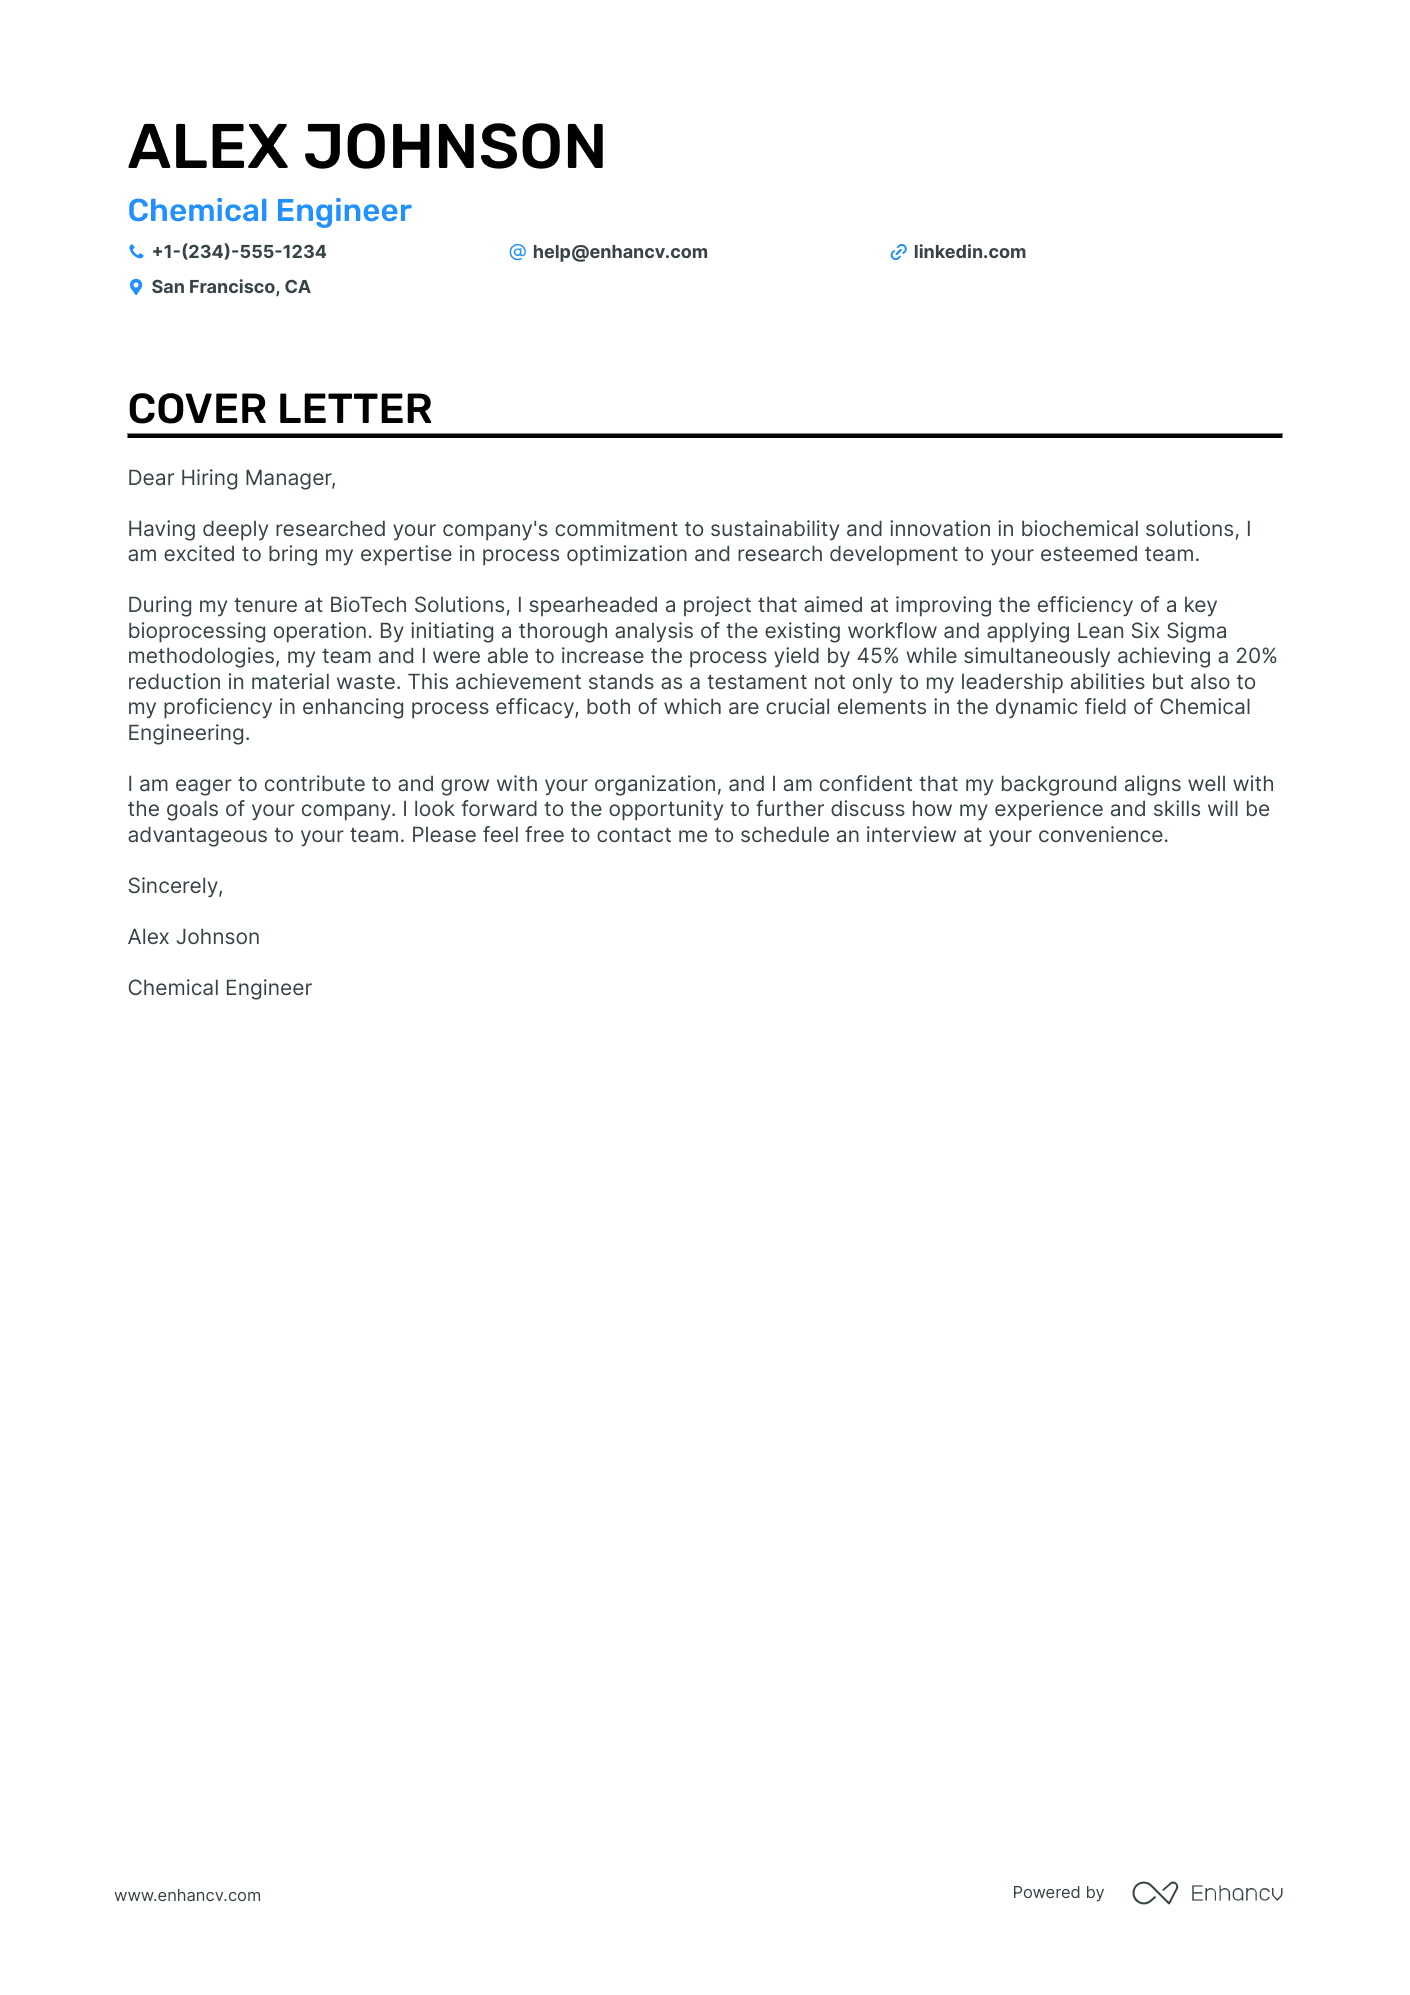 Chemical Engineer cover letter